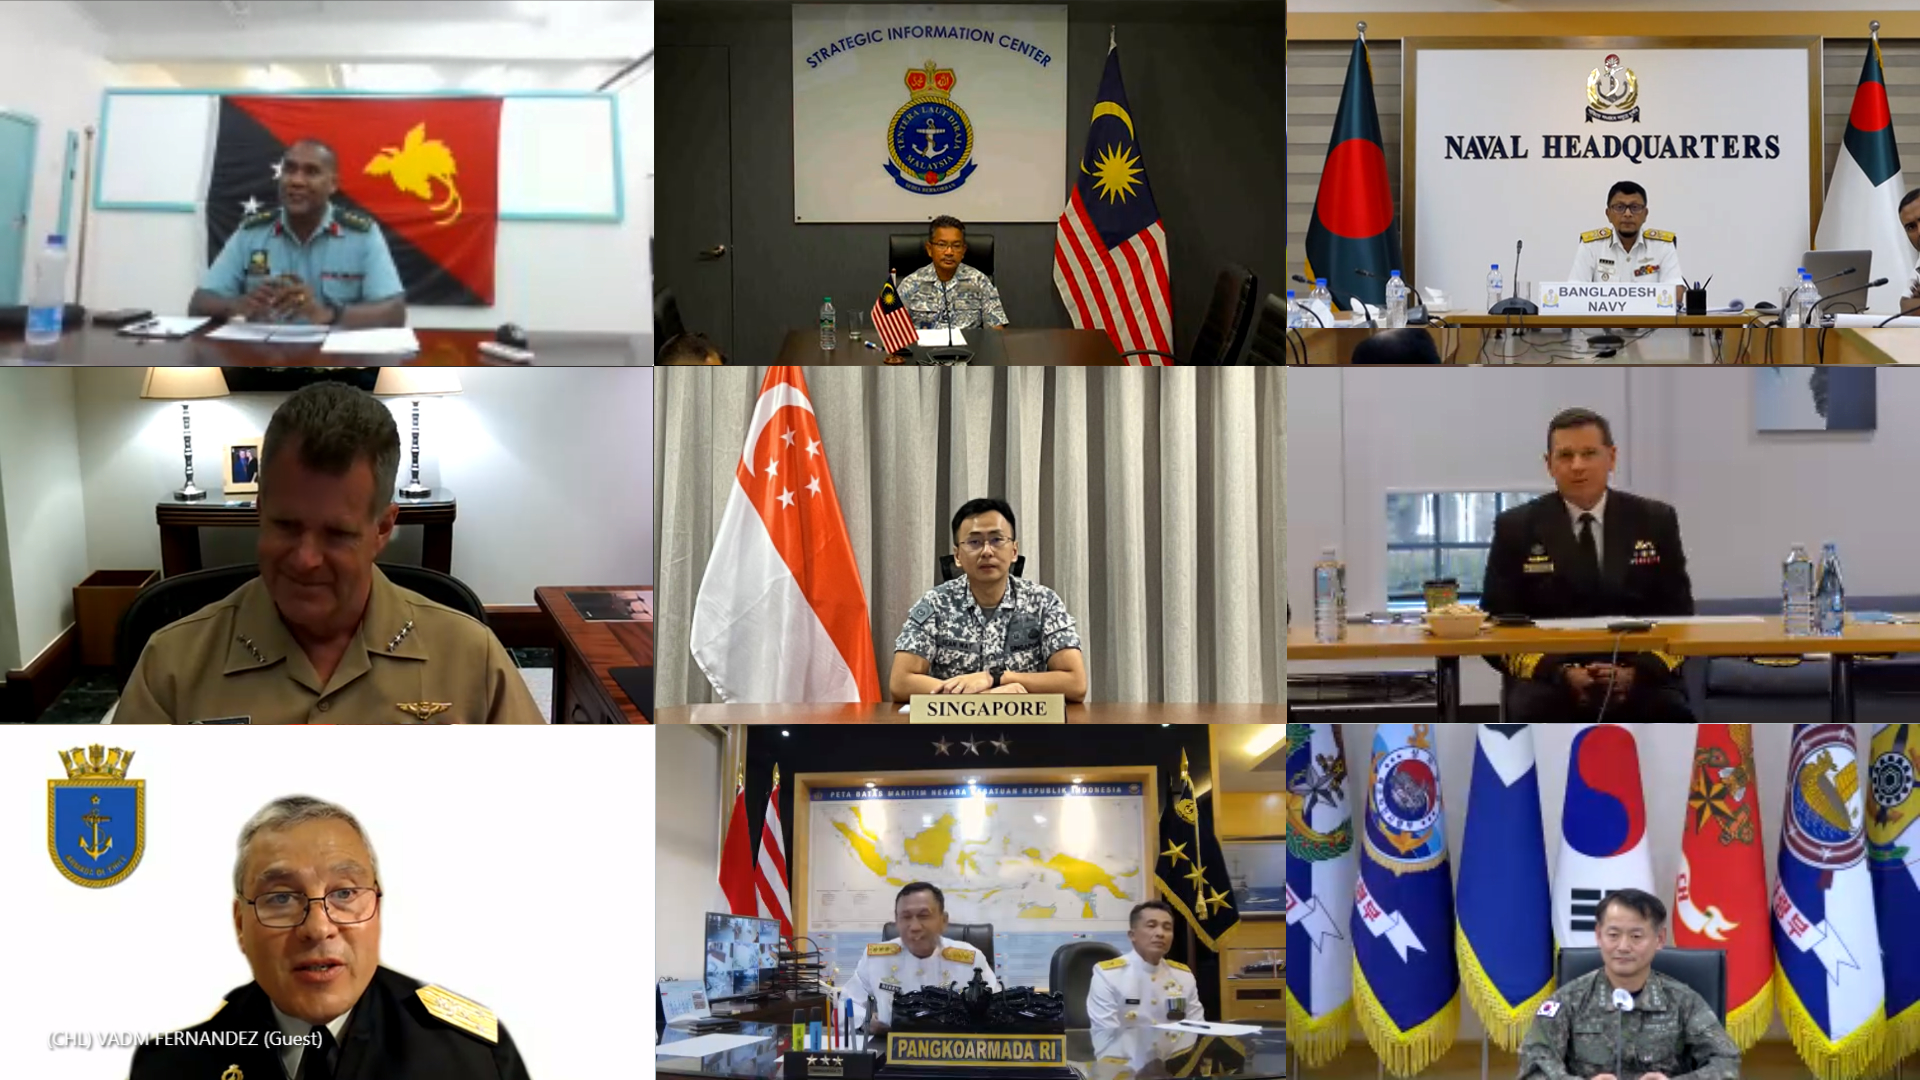 Strengthening our Cooperation with Navies and Other Partners